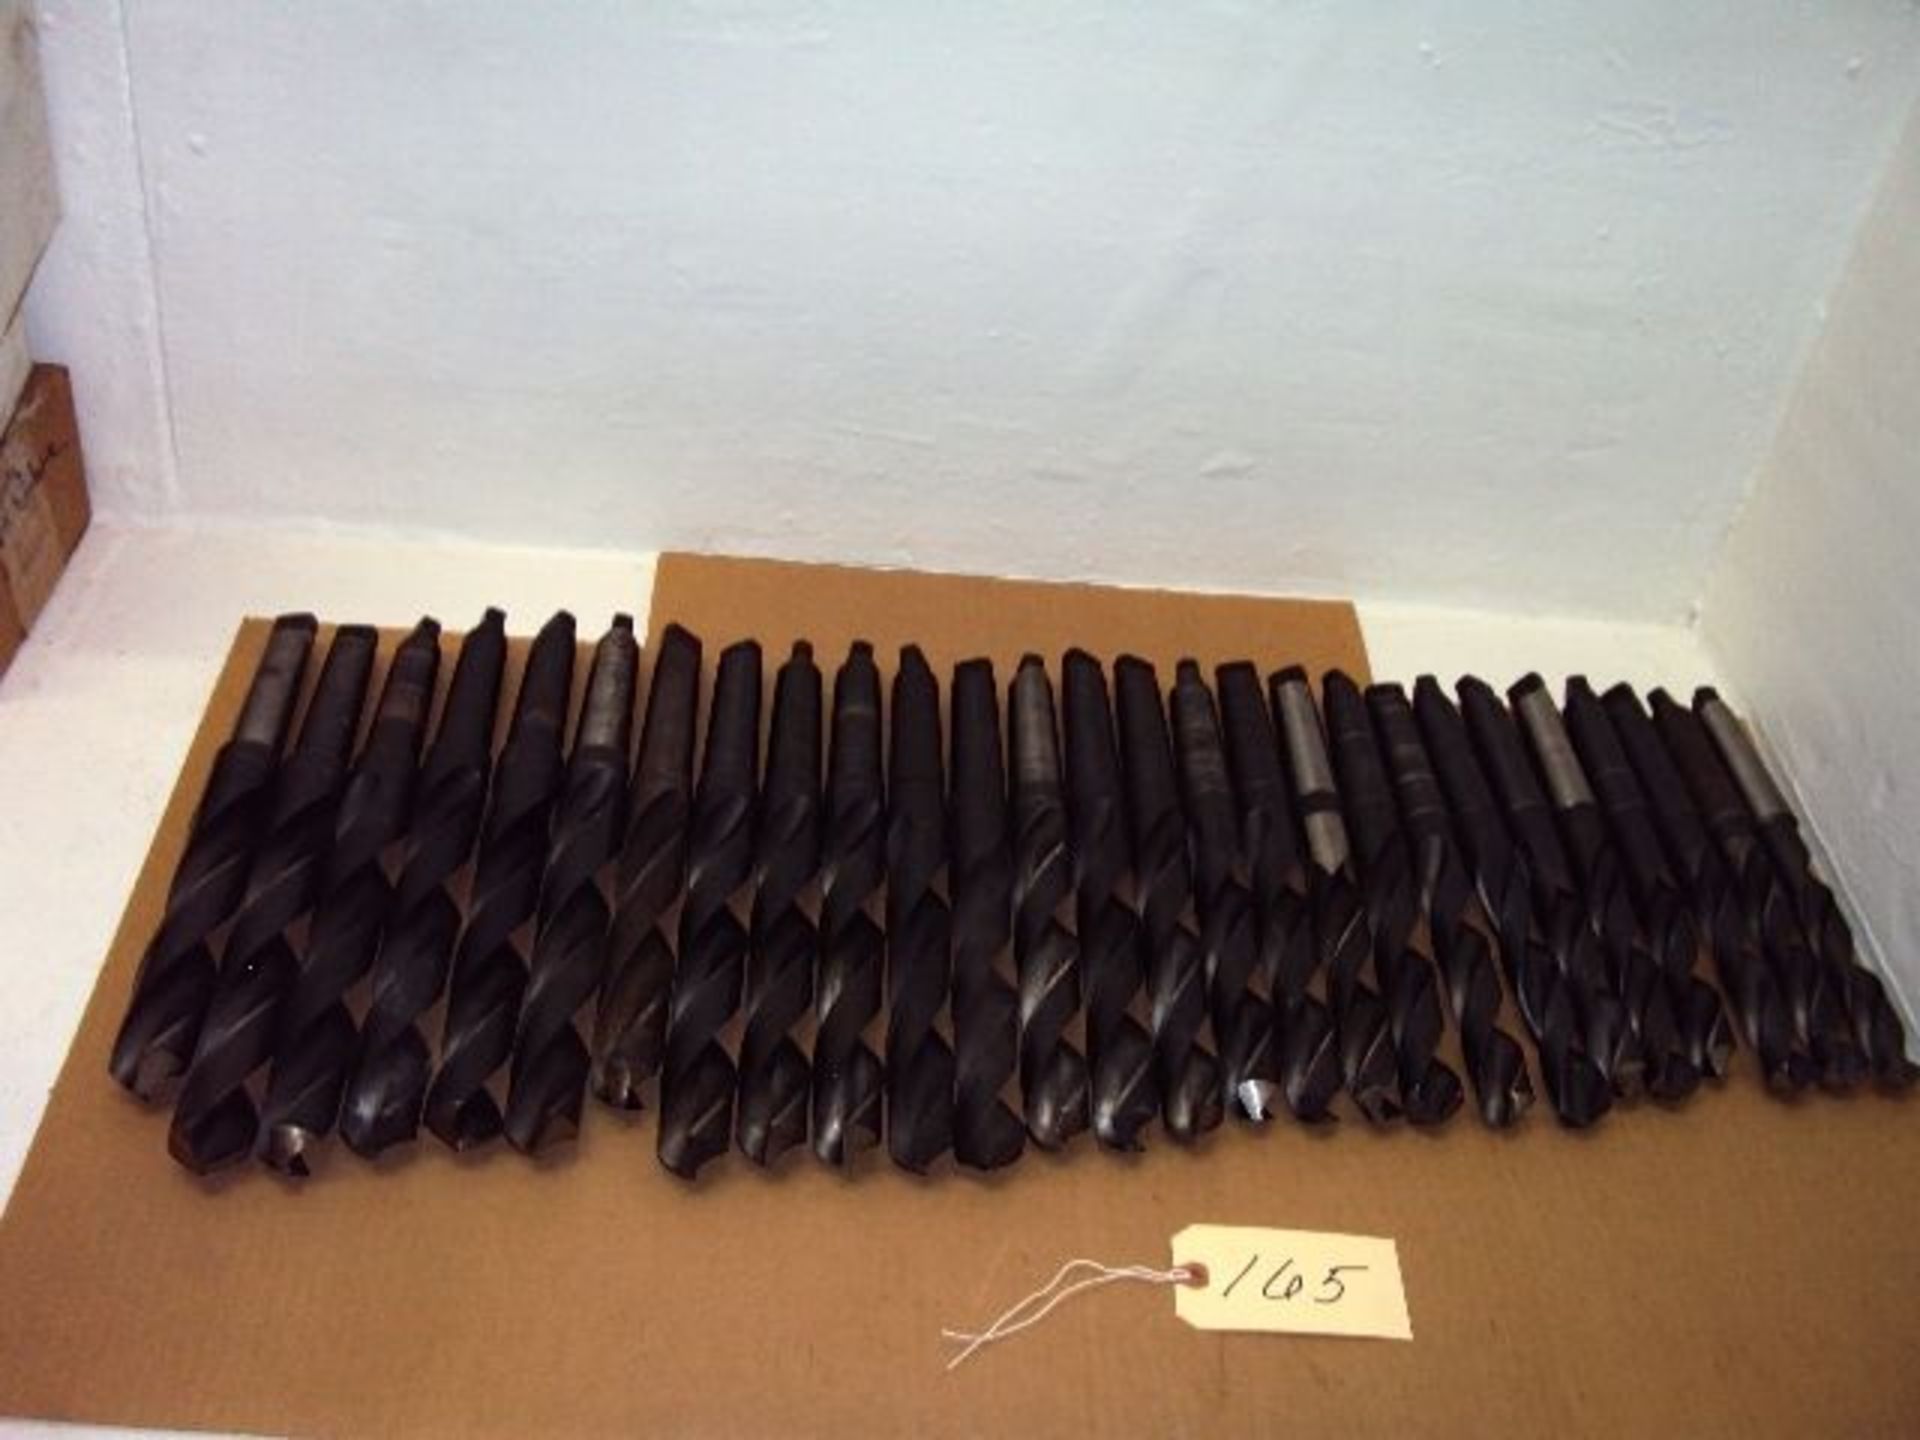 (28) MT4 Taper Shank HSS Drills 1-1/16” to 1-1/2” by 64ths - No Repeats - missing 1-17/64